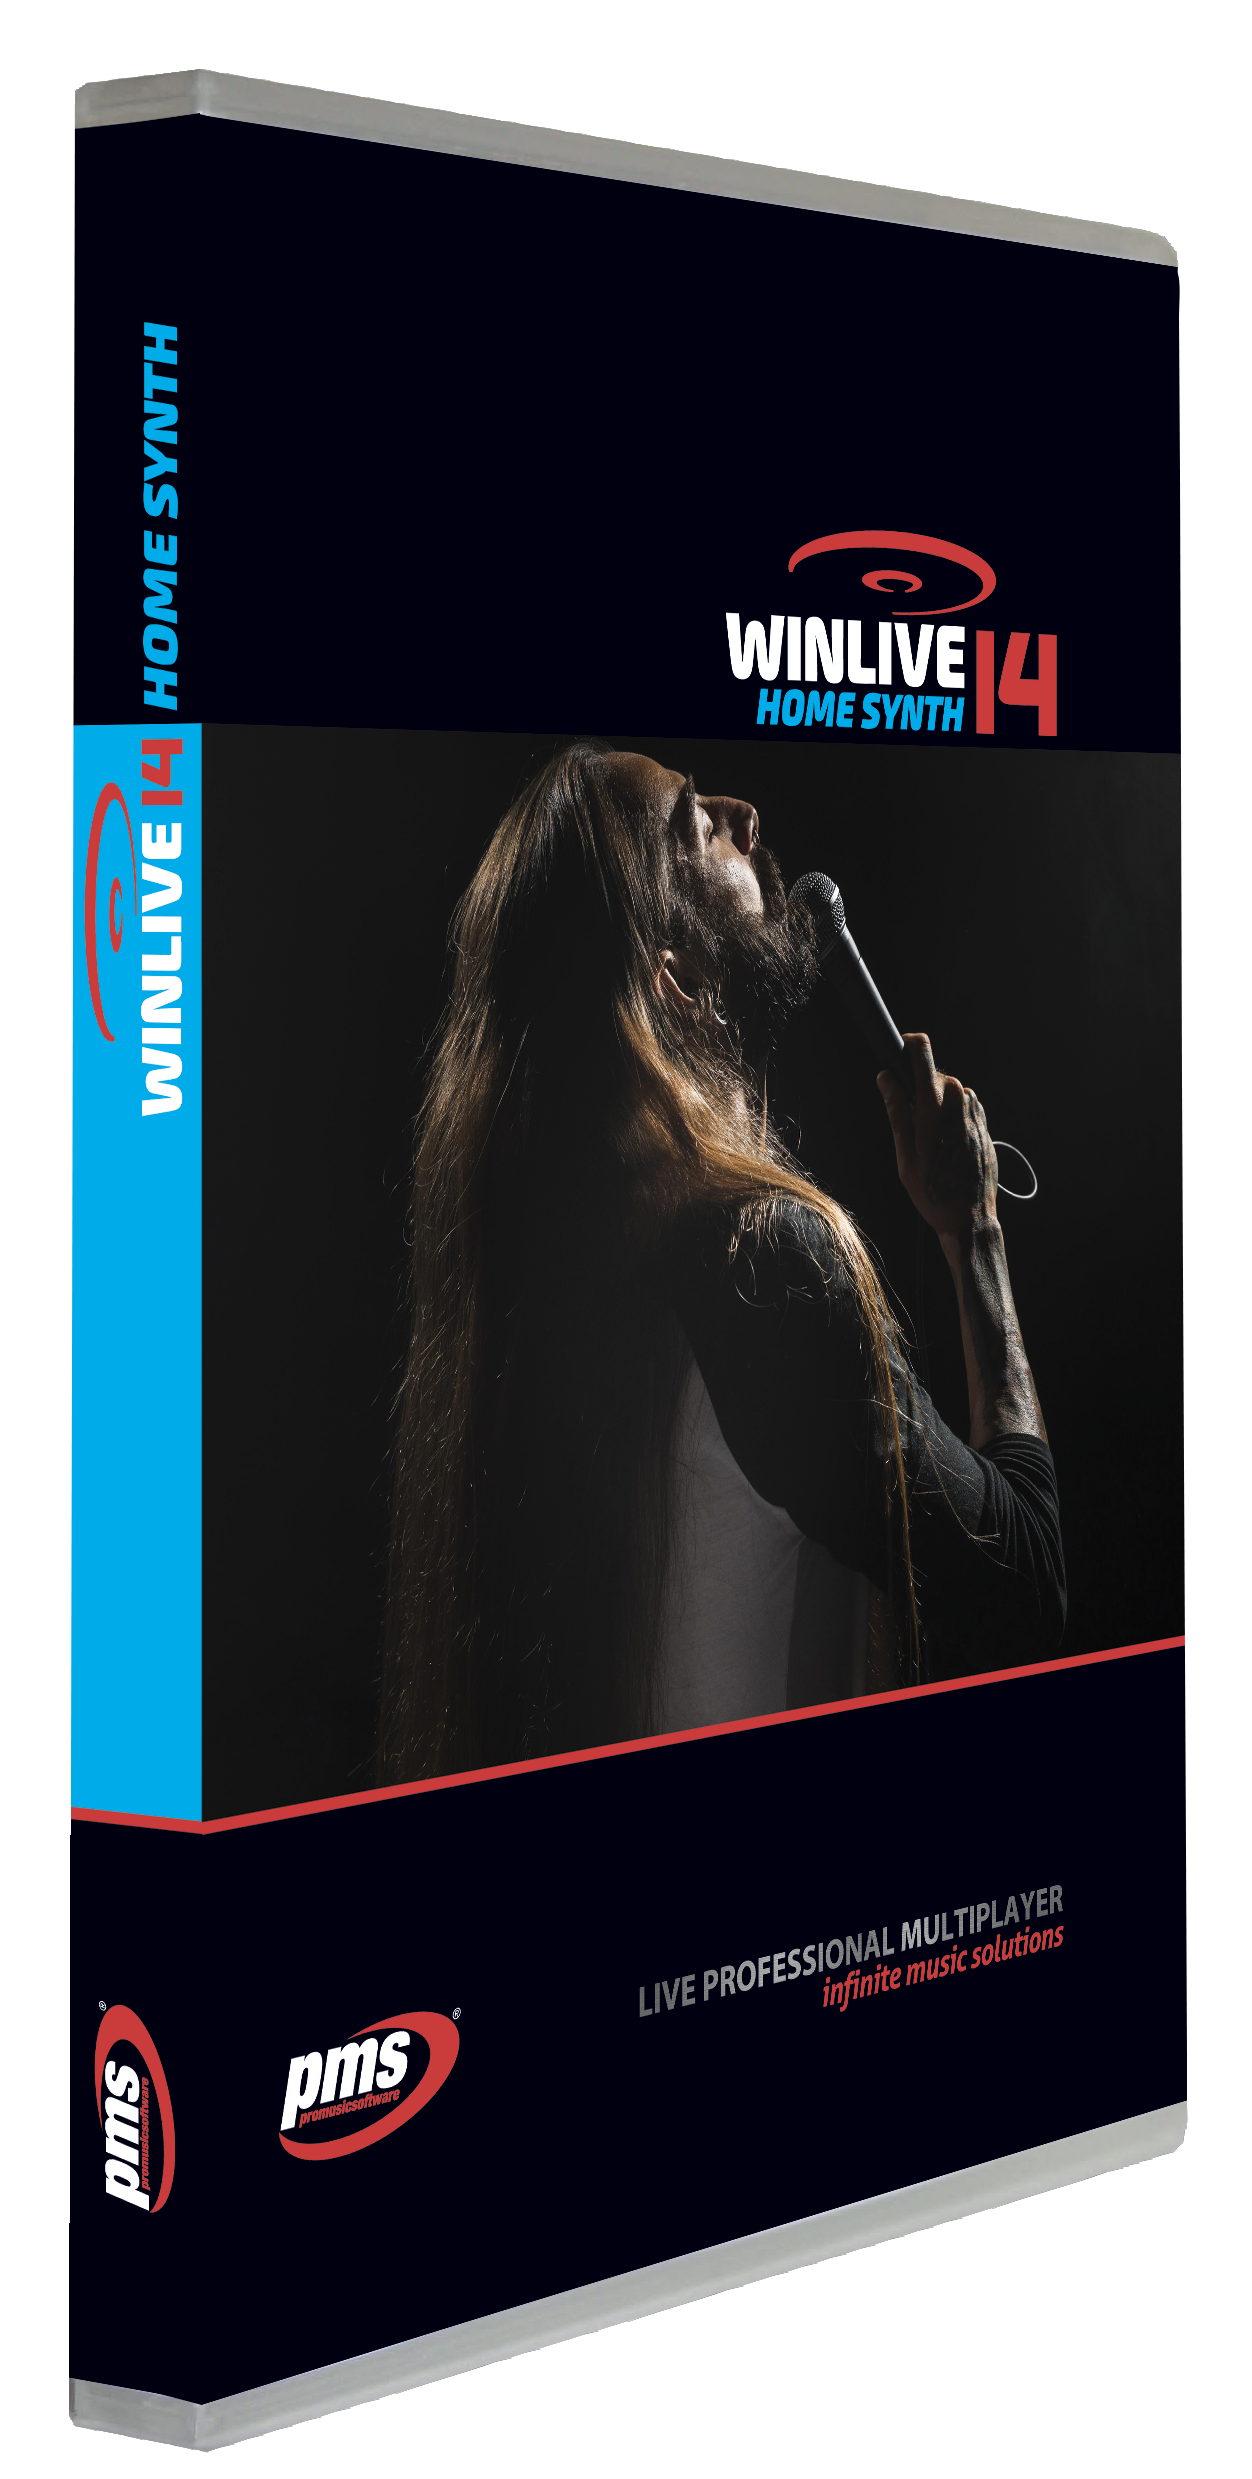 Winlive Home Synth 14